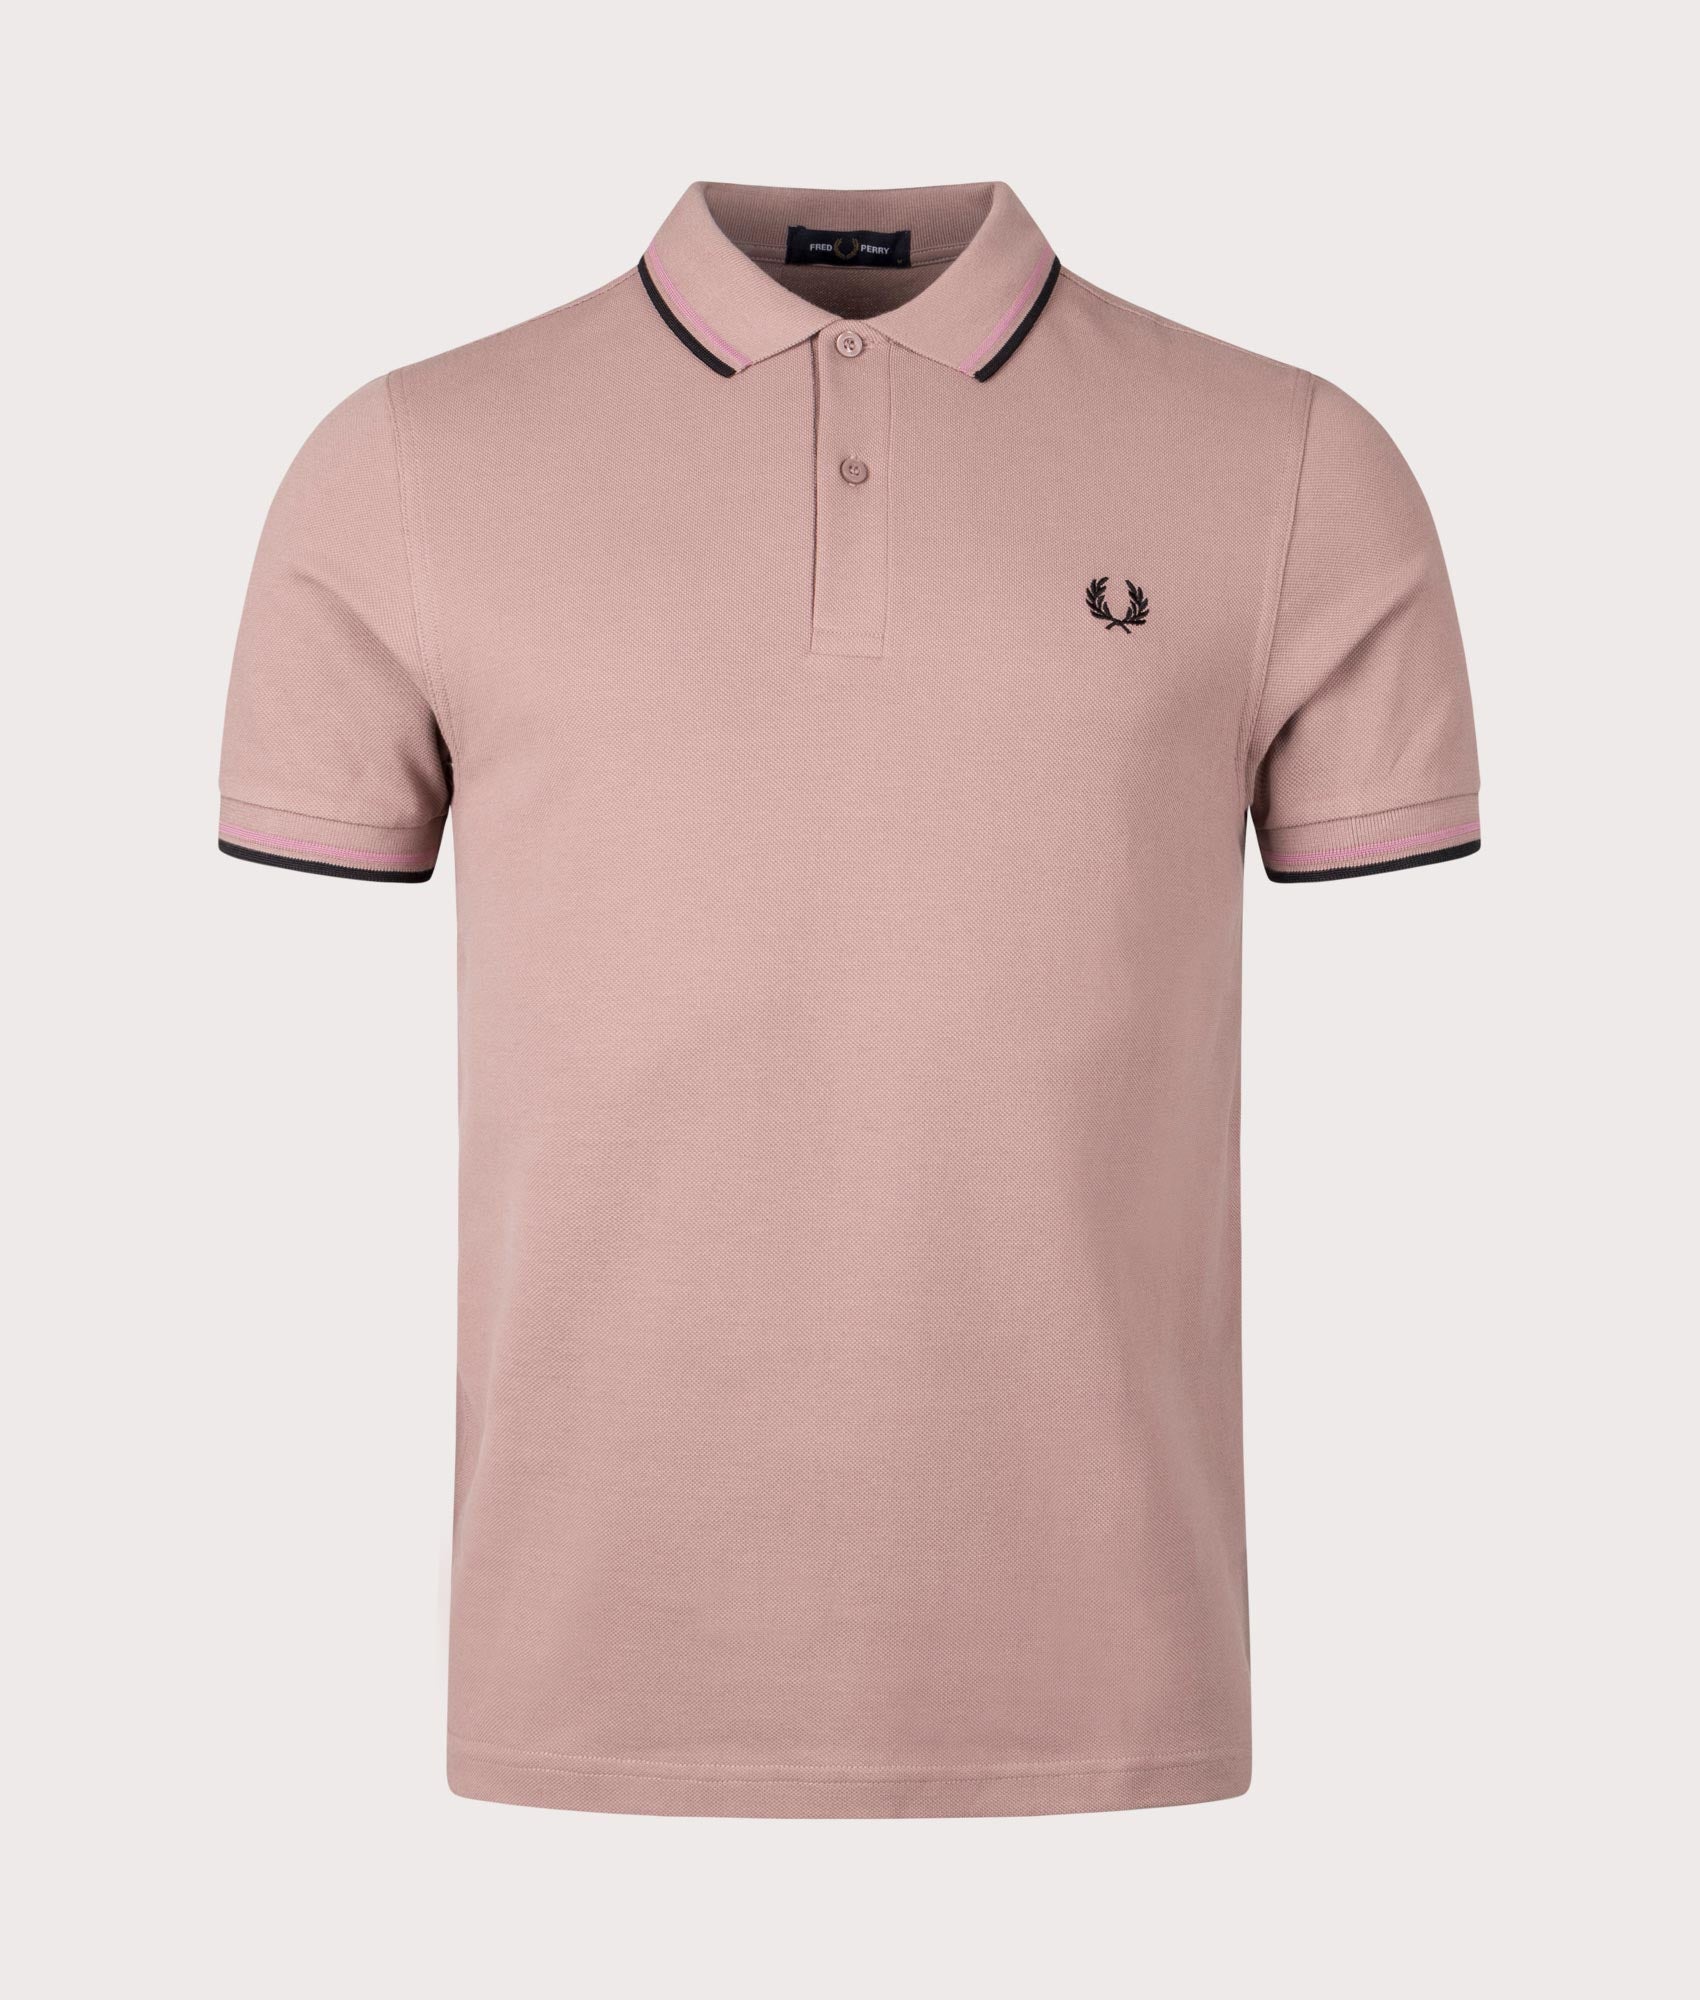 Fred Perry Mens Twin Tipped Polo Shirt - Colour: U89 Dark Pink/Dusty Rose/Black - Size: XXL